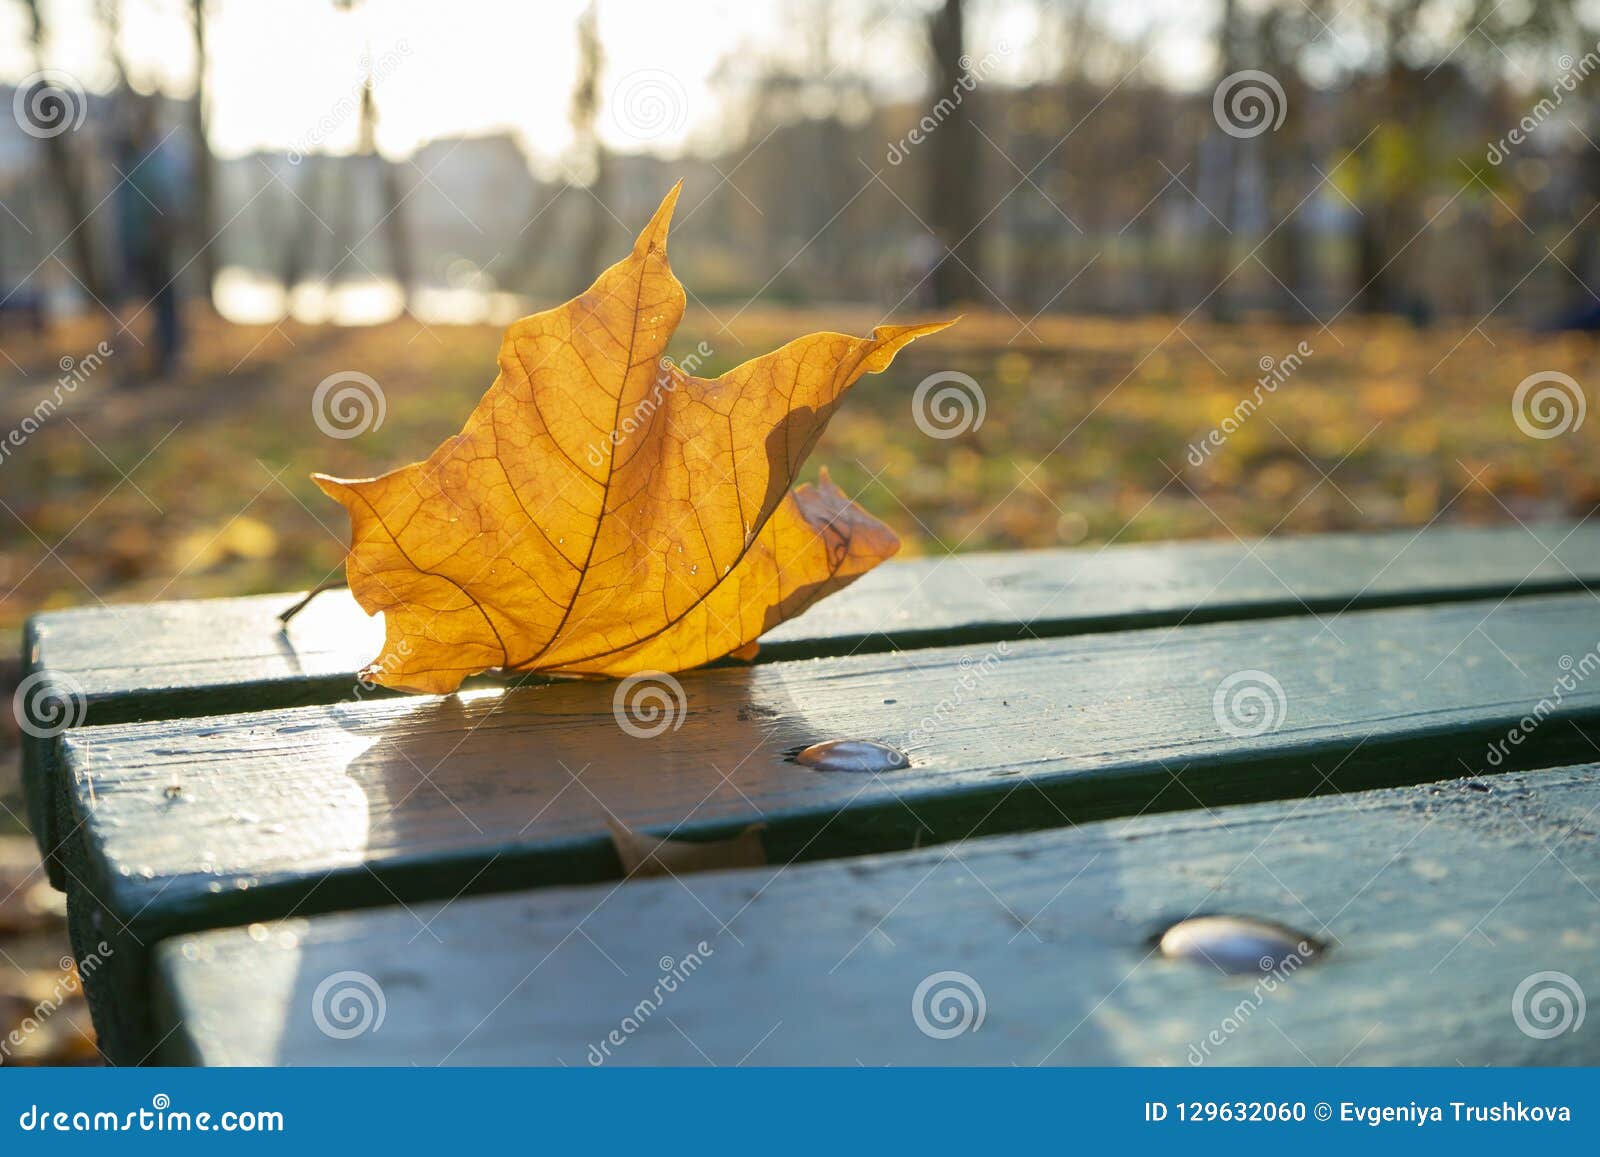 Falling Leaves. Autumn in City Park in Yellow Leaves. Stock Photo